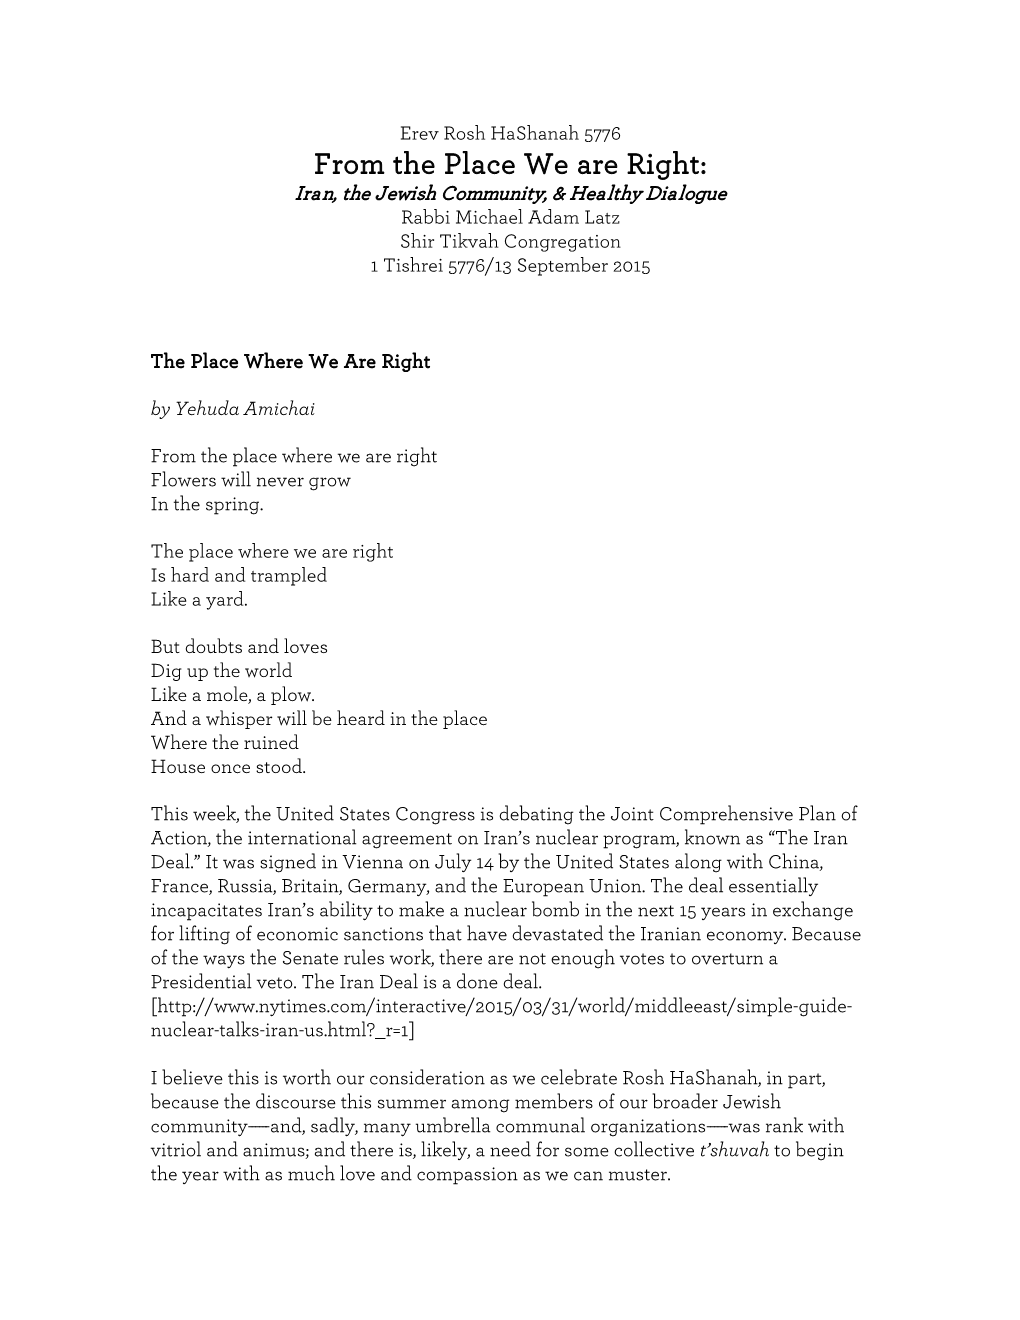 From the Place We Are Right: Iran, the Jewish Community, & Healthy Dialogue Rabbi Michael Adam Latz Shir Tikvah Congregation 1 Tishrei 5776/13 September 2015